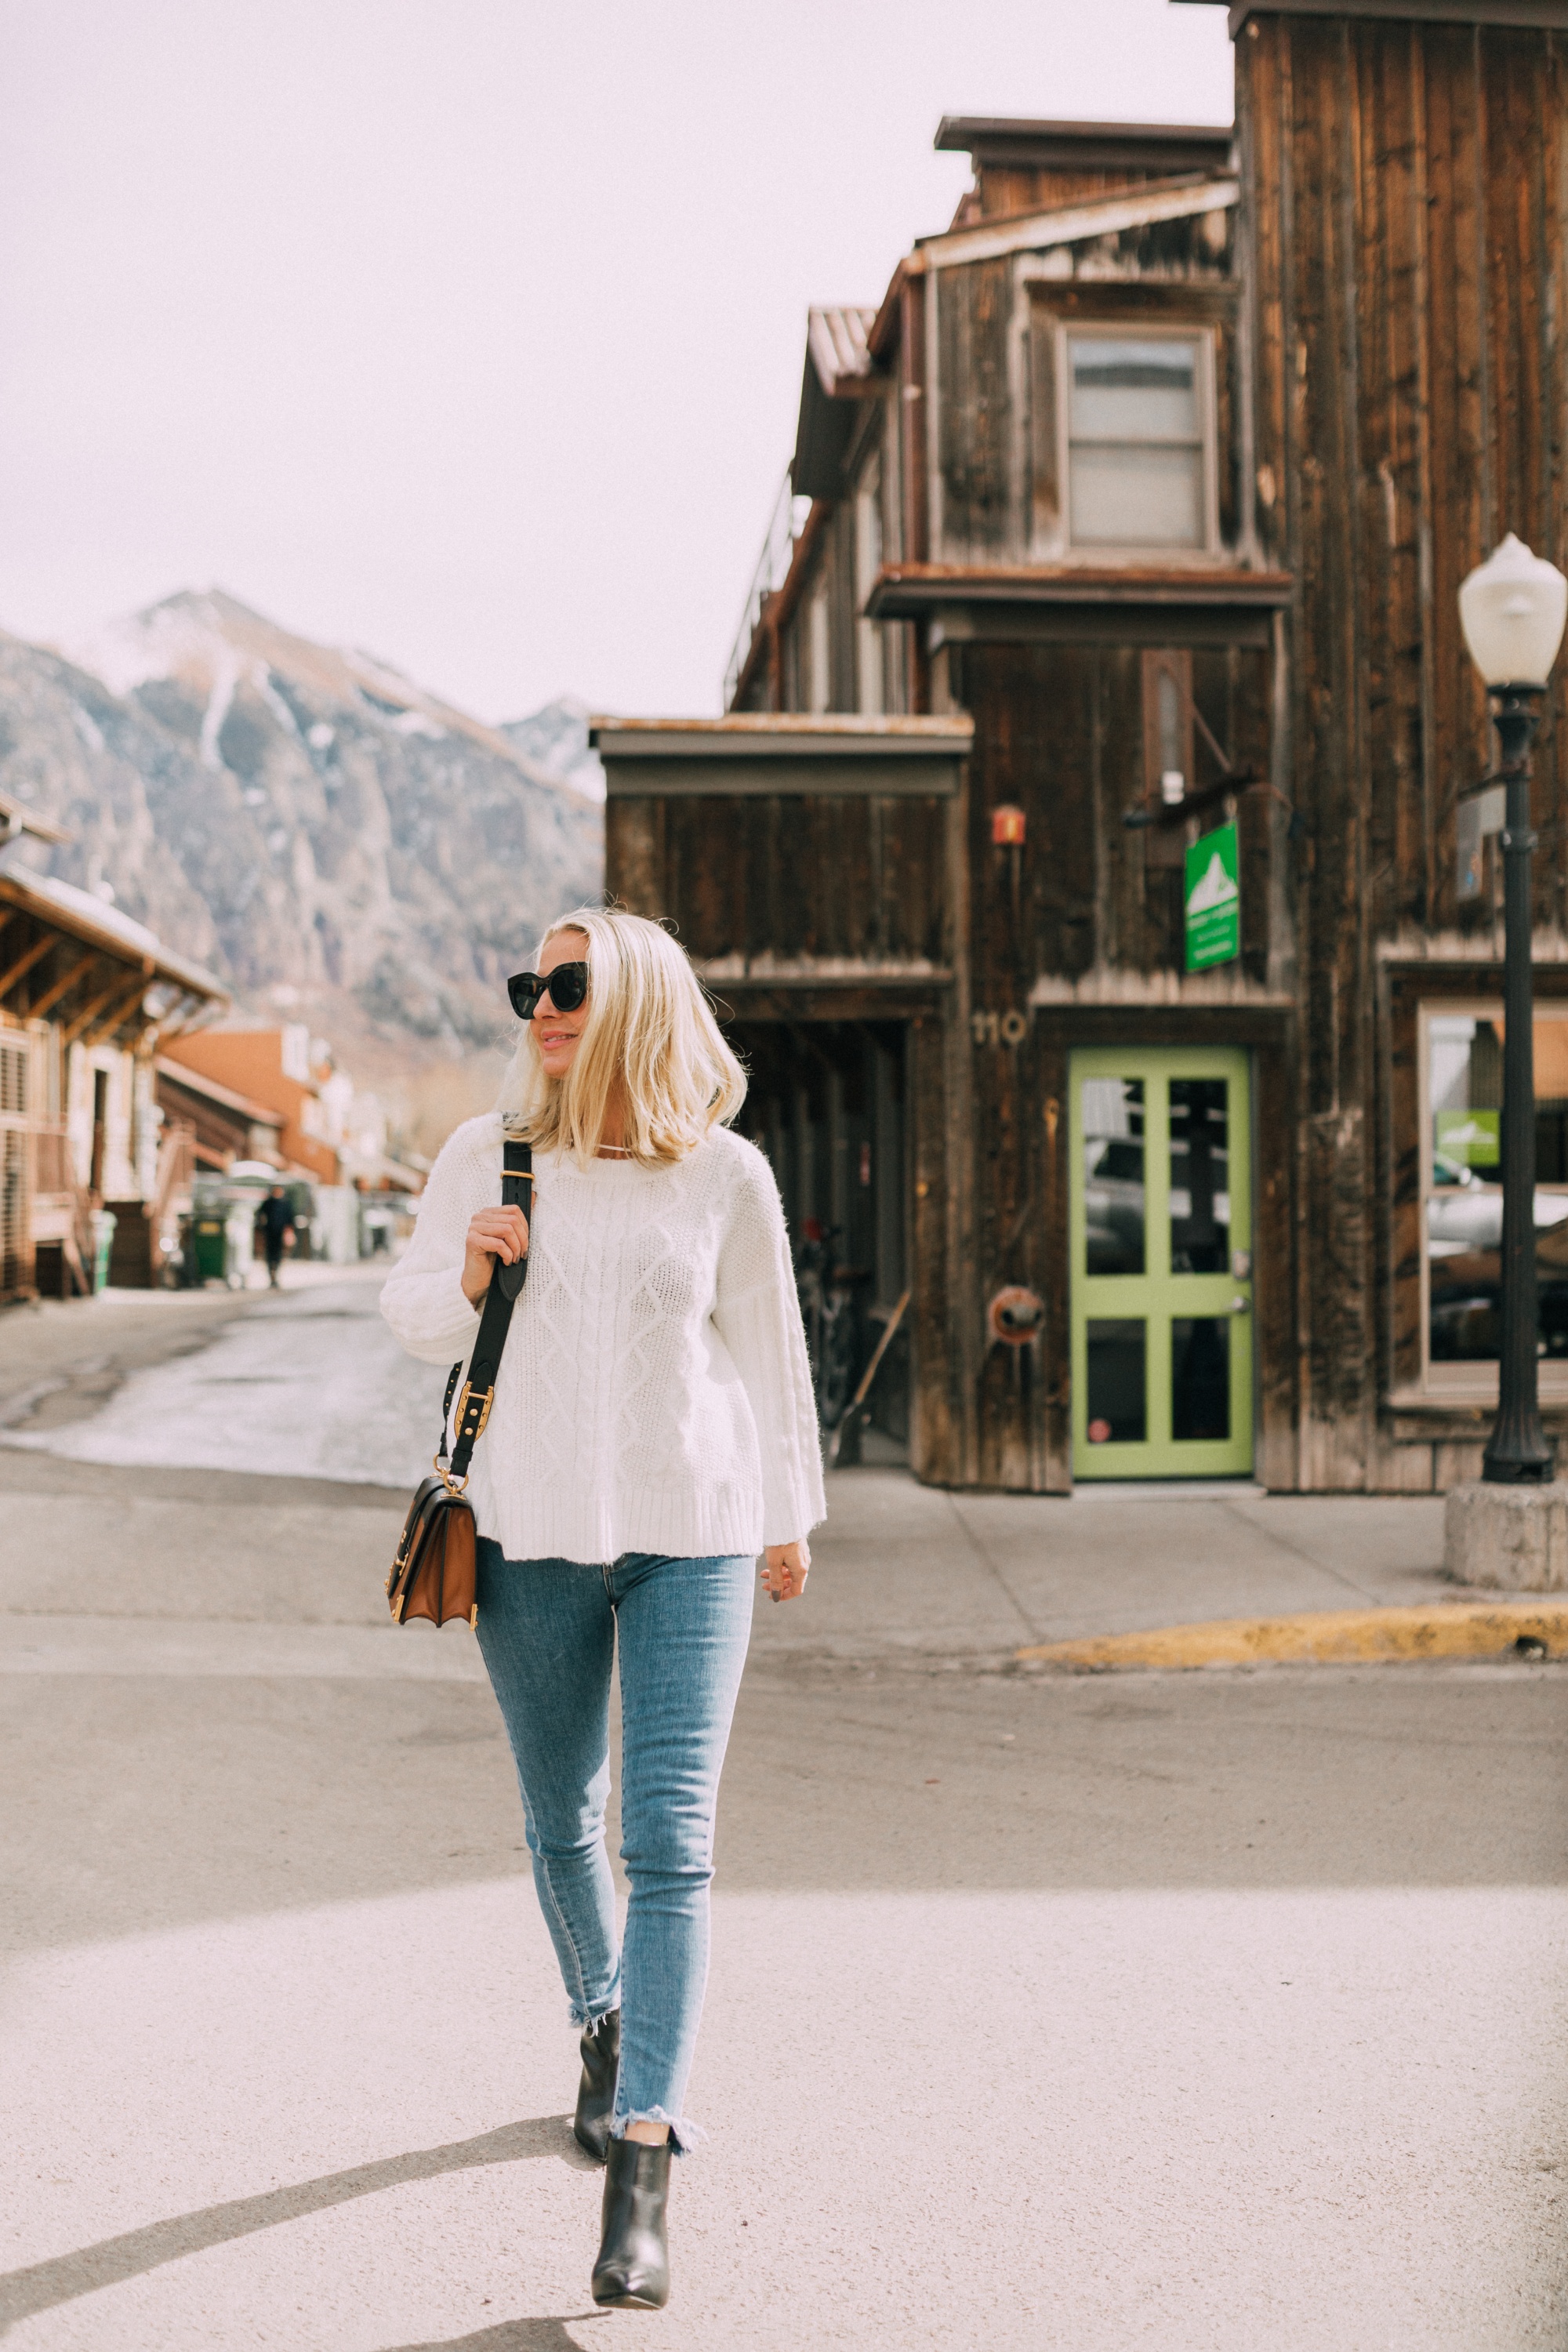 Affordable Sweaters, fashion blogger Erin Busbee of BusbeeStyle.com wearing a white cable knit sweater, Levi's jeans, and black heeled booties from JCPenney in Telluride, CO